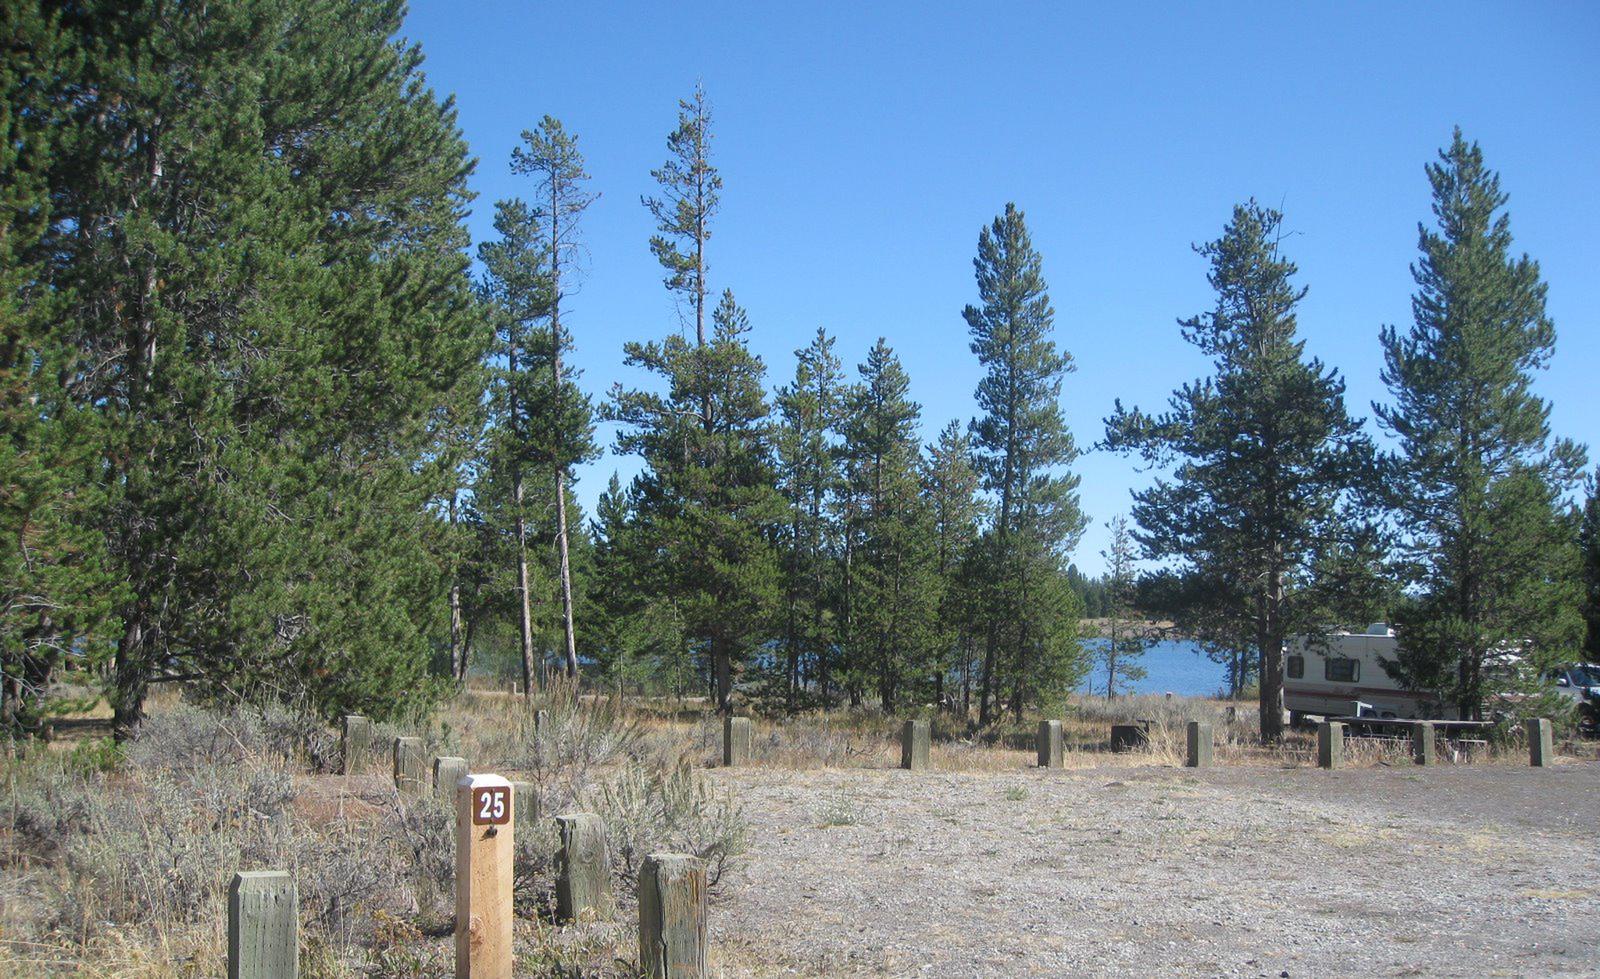 Site 25, campsite surrounded by pine trees, picnic table & fire ringSite 25